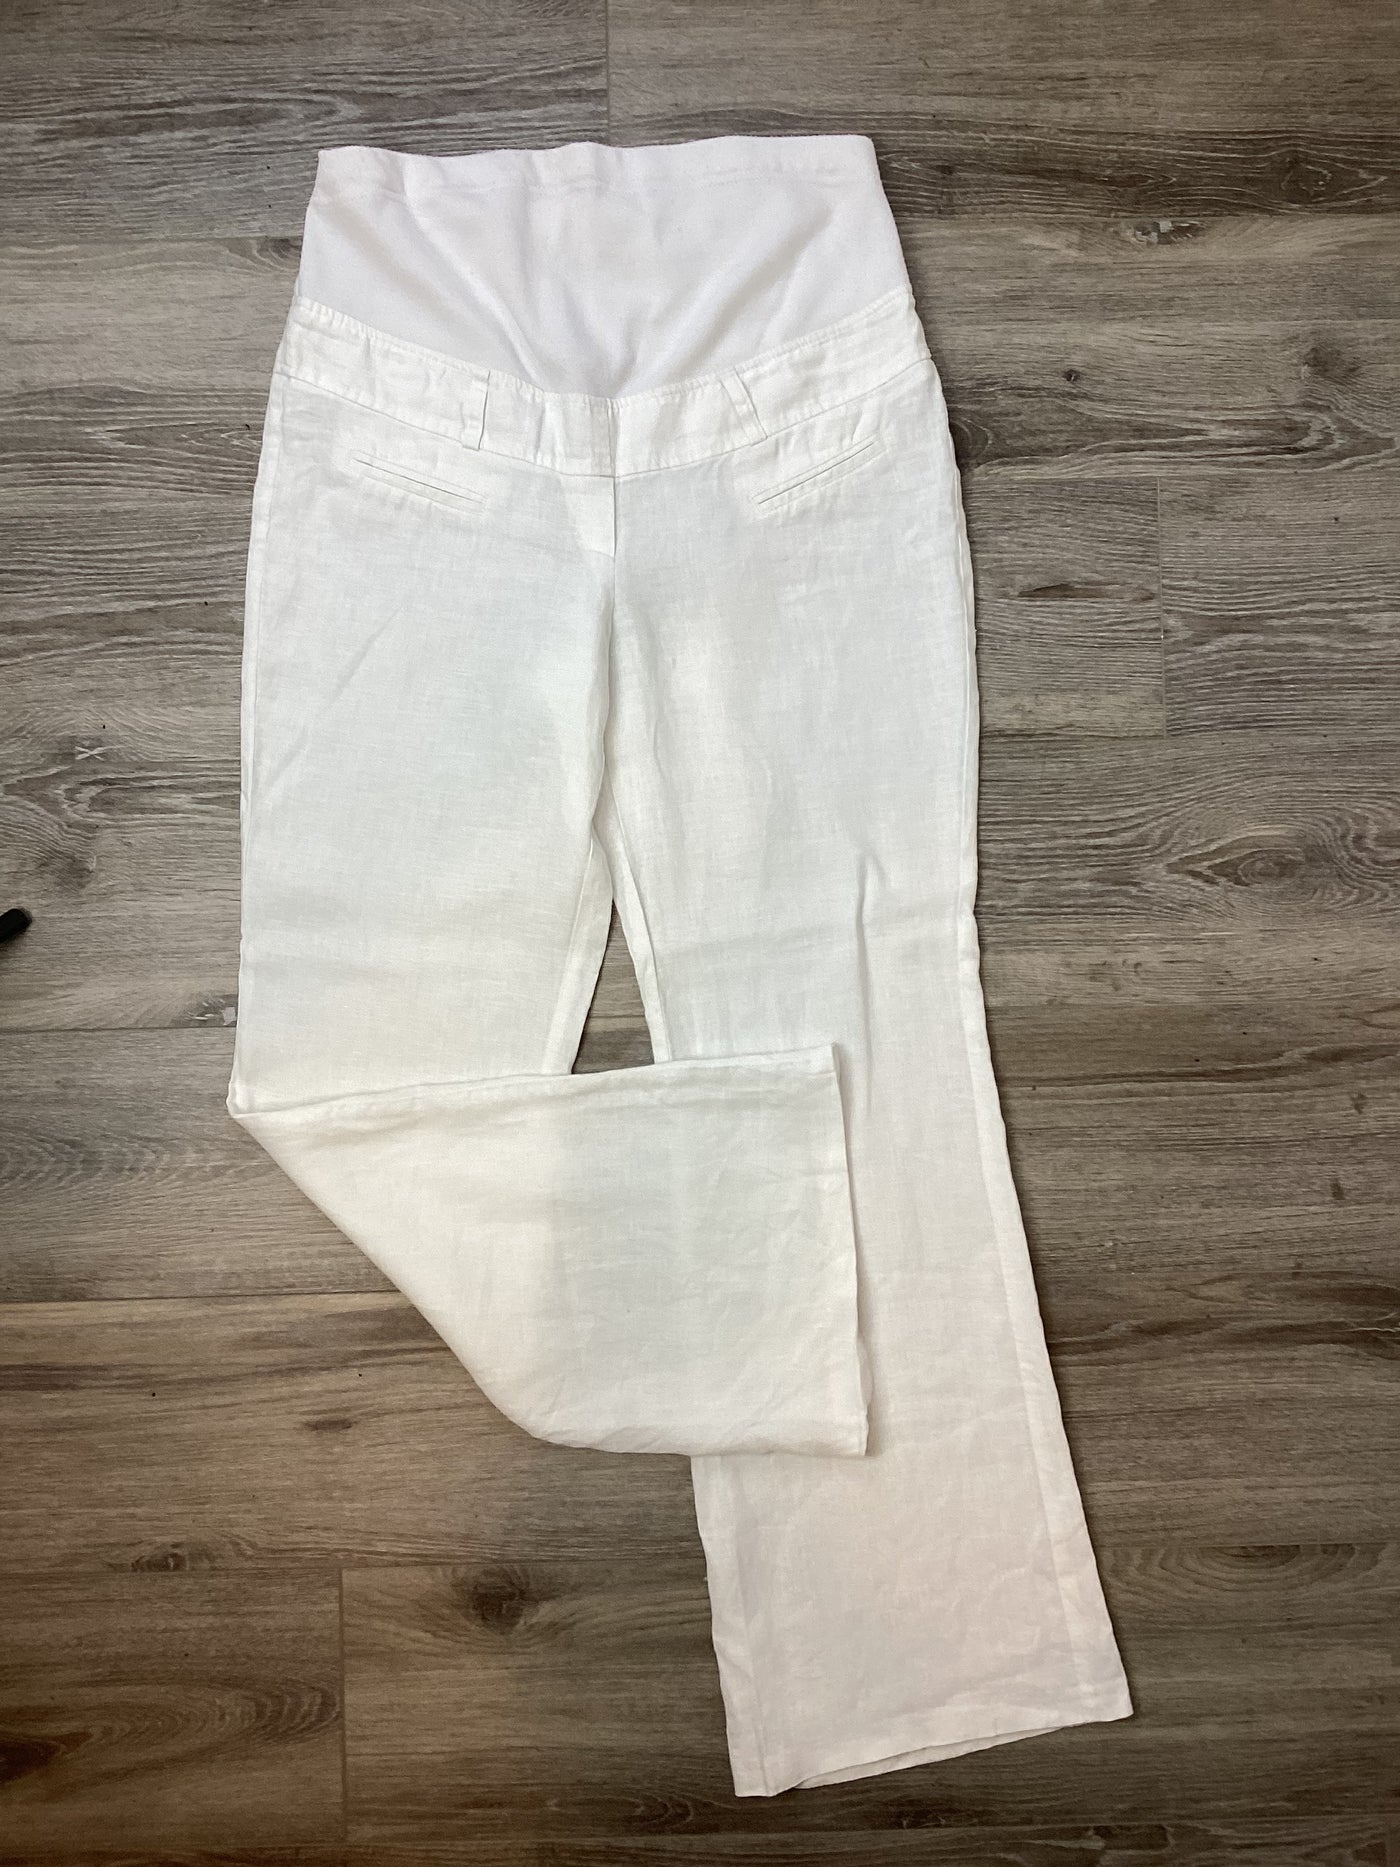 Red Herring Maternity white linen overbump trousers - Size 10